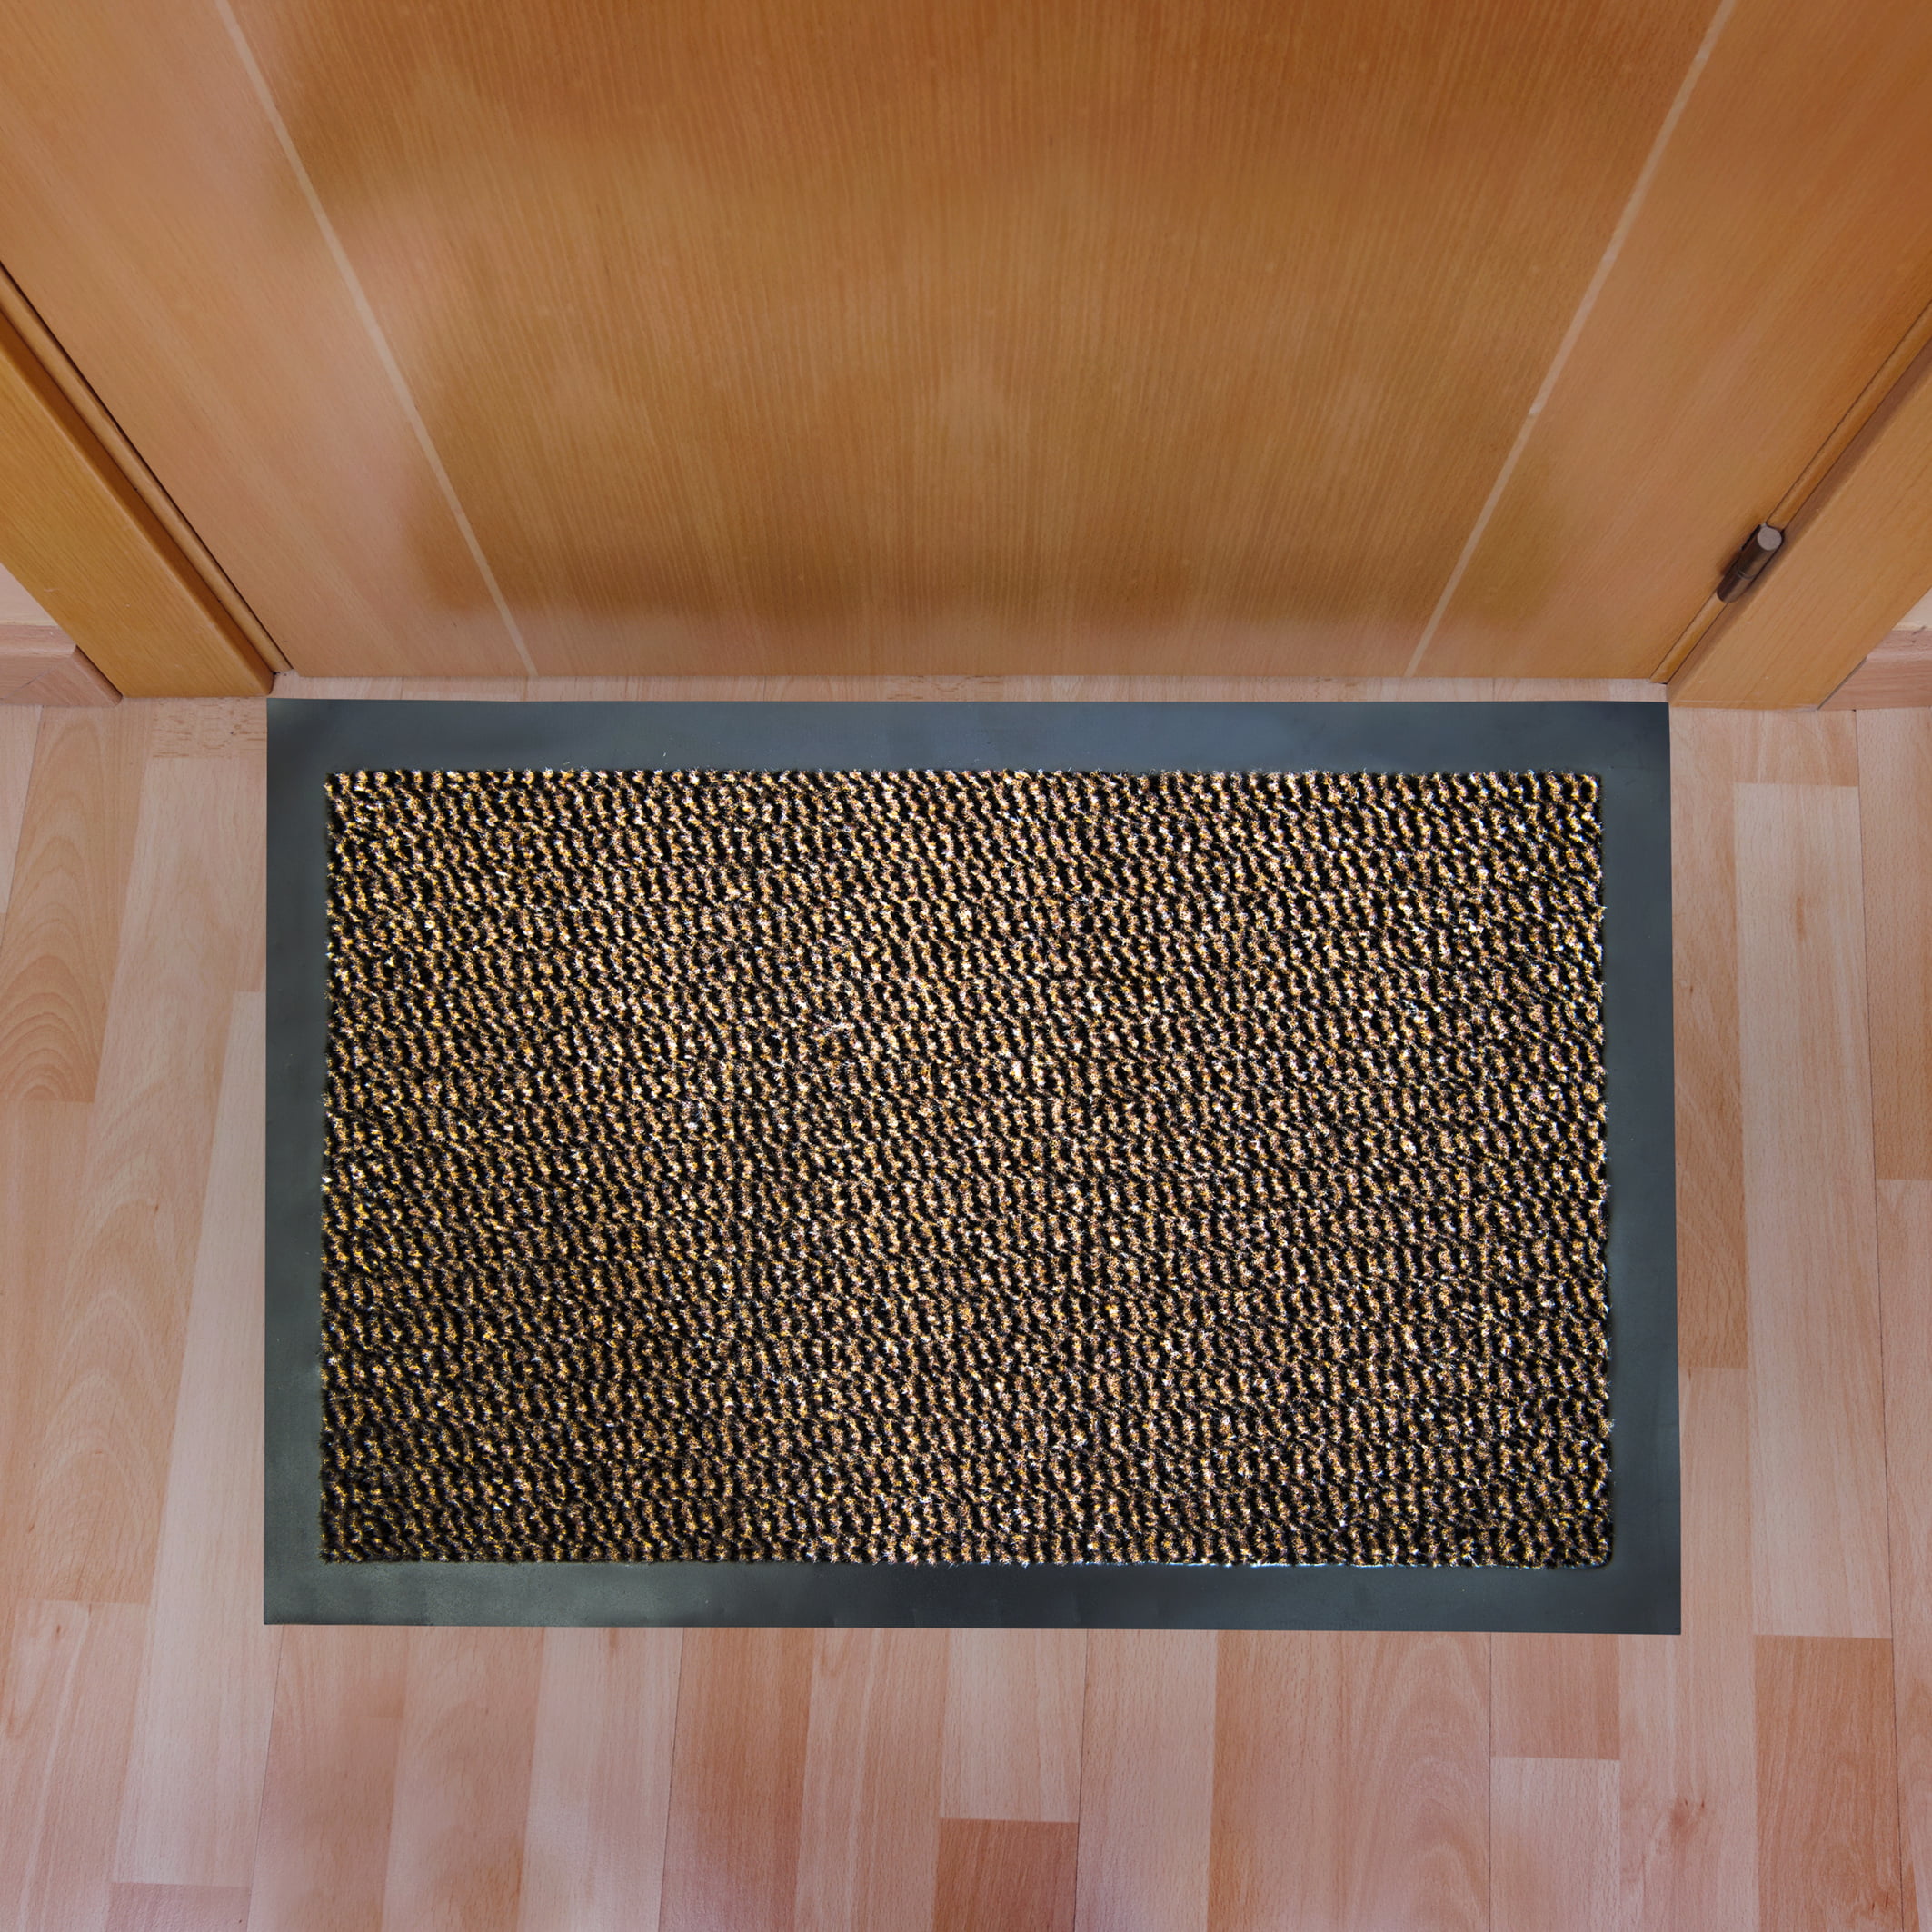 ITSOFT Indoor Door Mats for Entryway, Non-Slip Entry Mat, 35x24 inch Brown & Camel, Size: 35 x 24